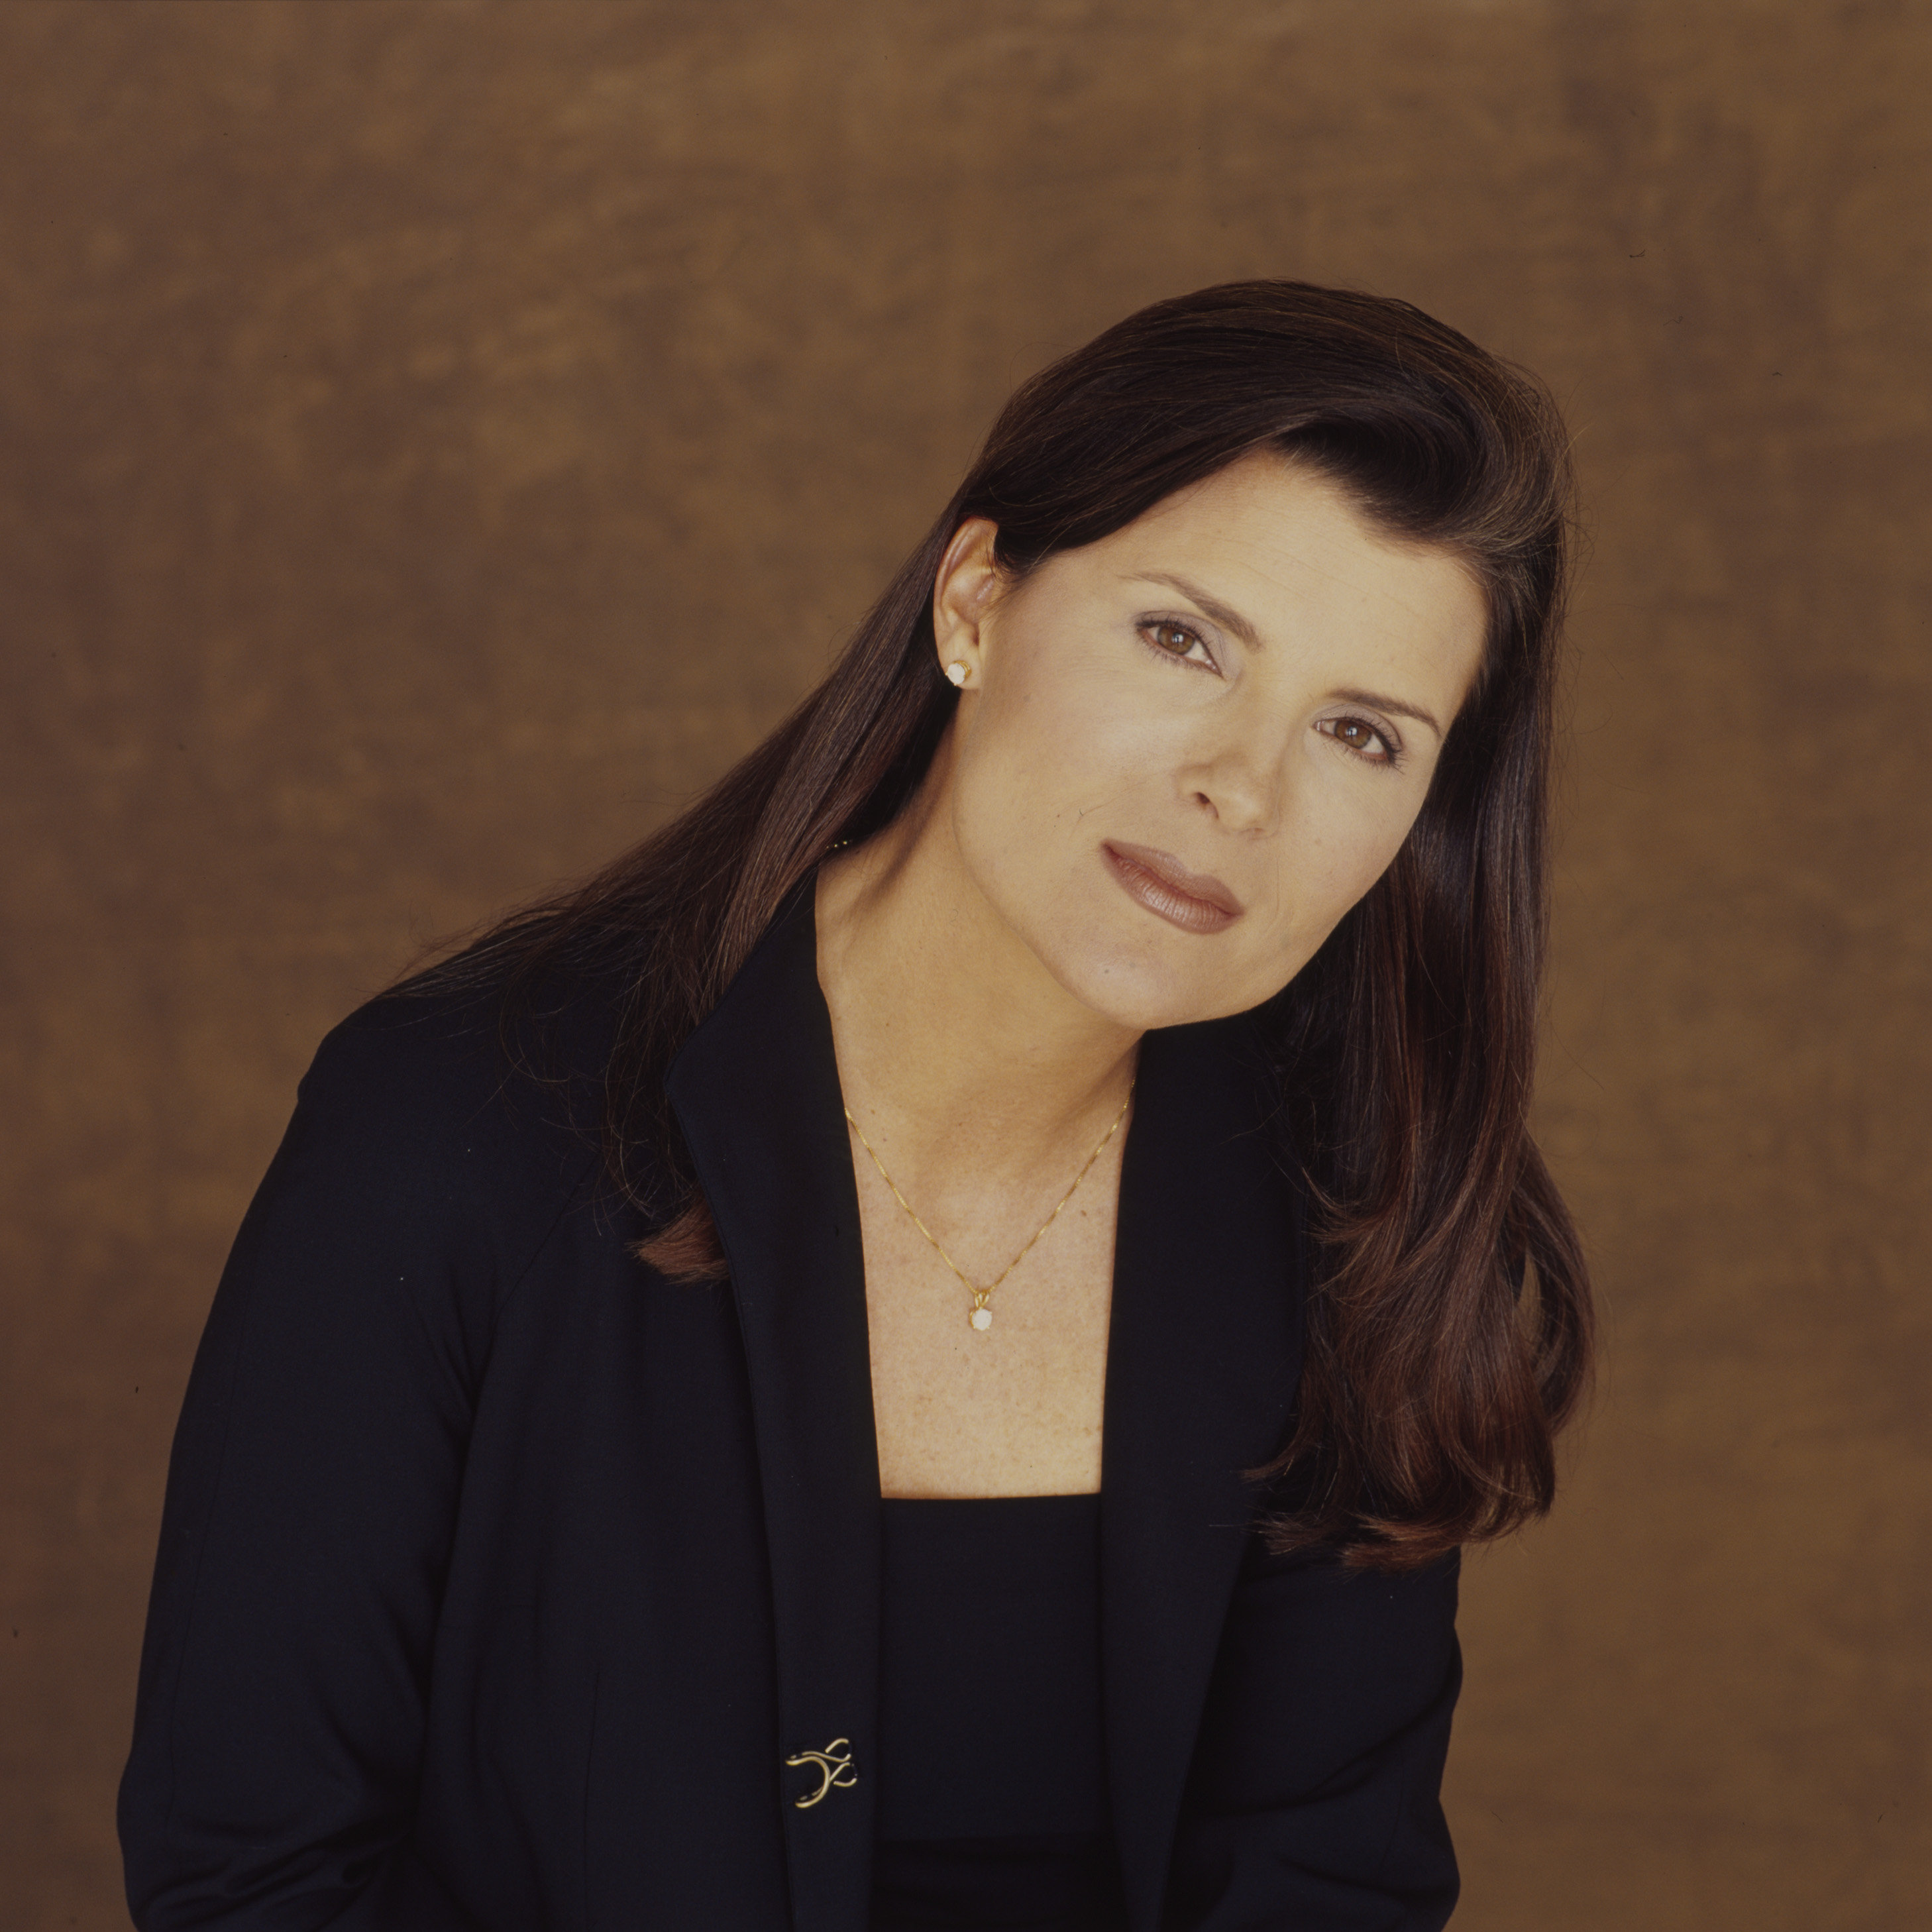 'The Bold and the Beautiful' actor Kimberlin Brown in a promotional photo for the ABC soap opera 'All My Children.'